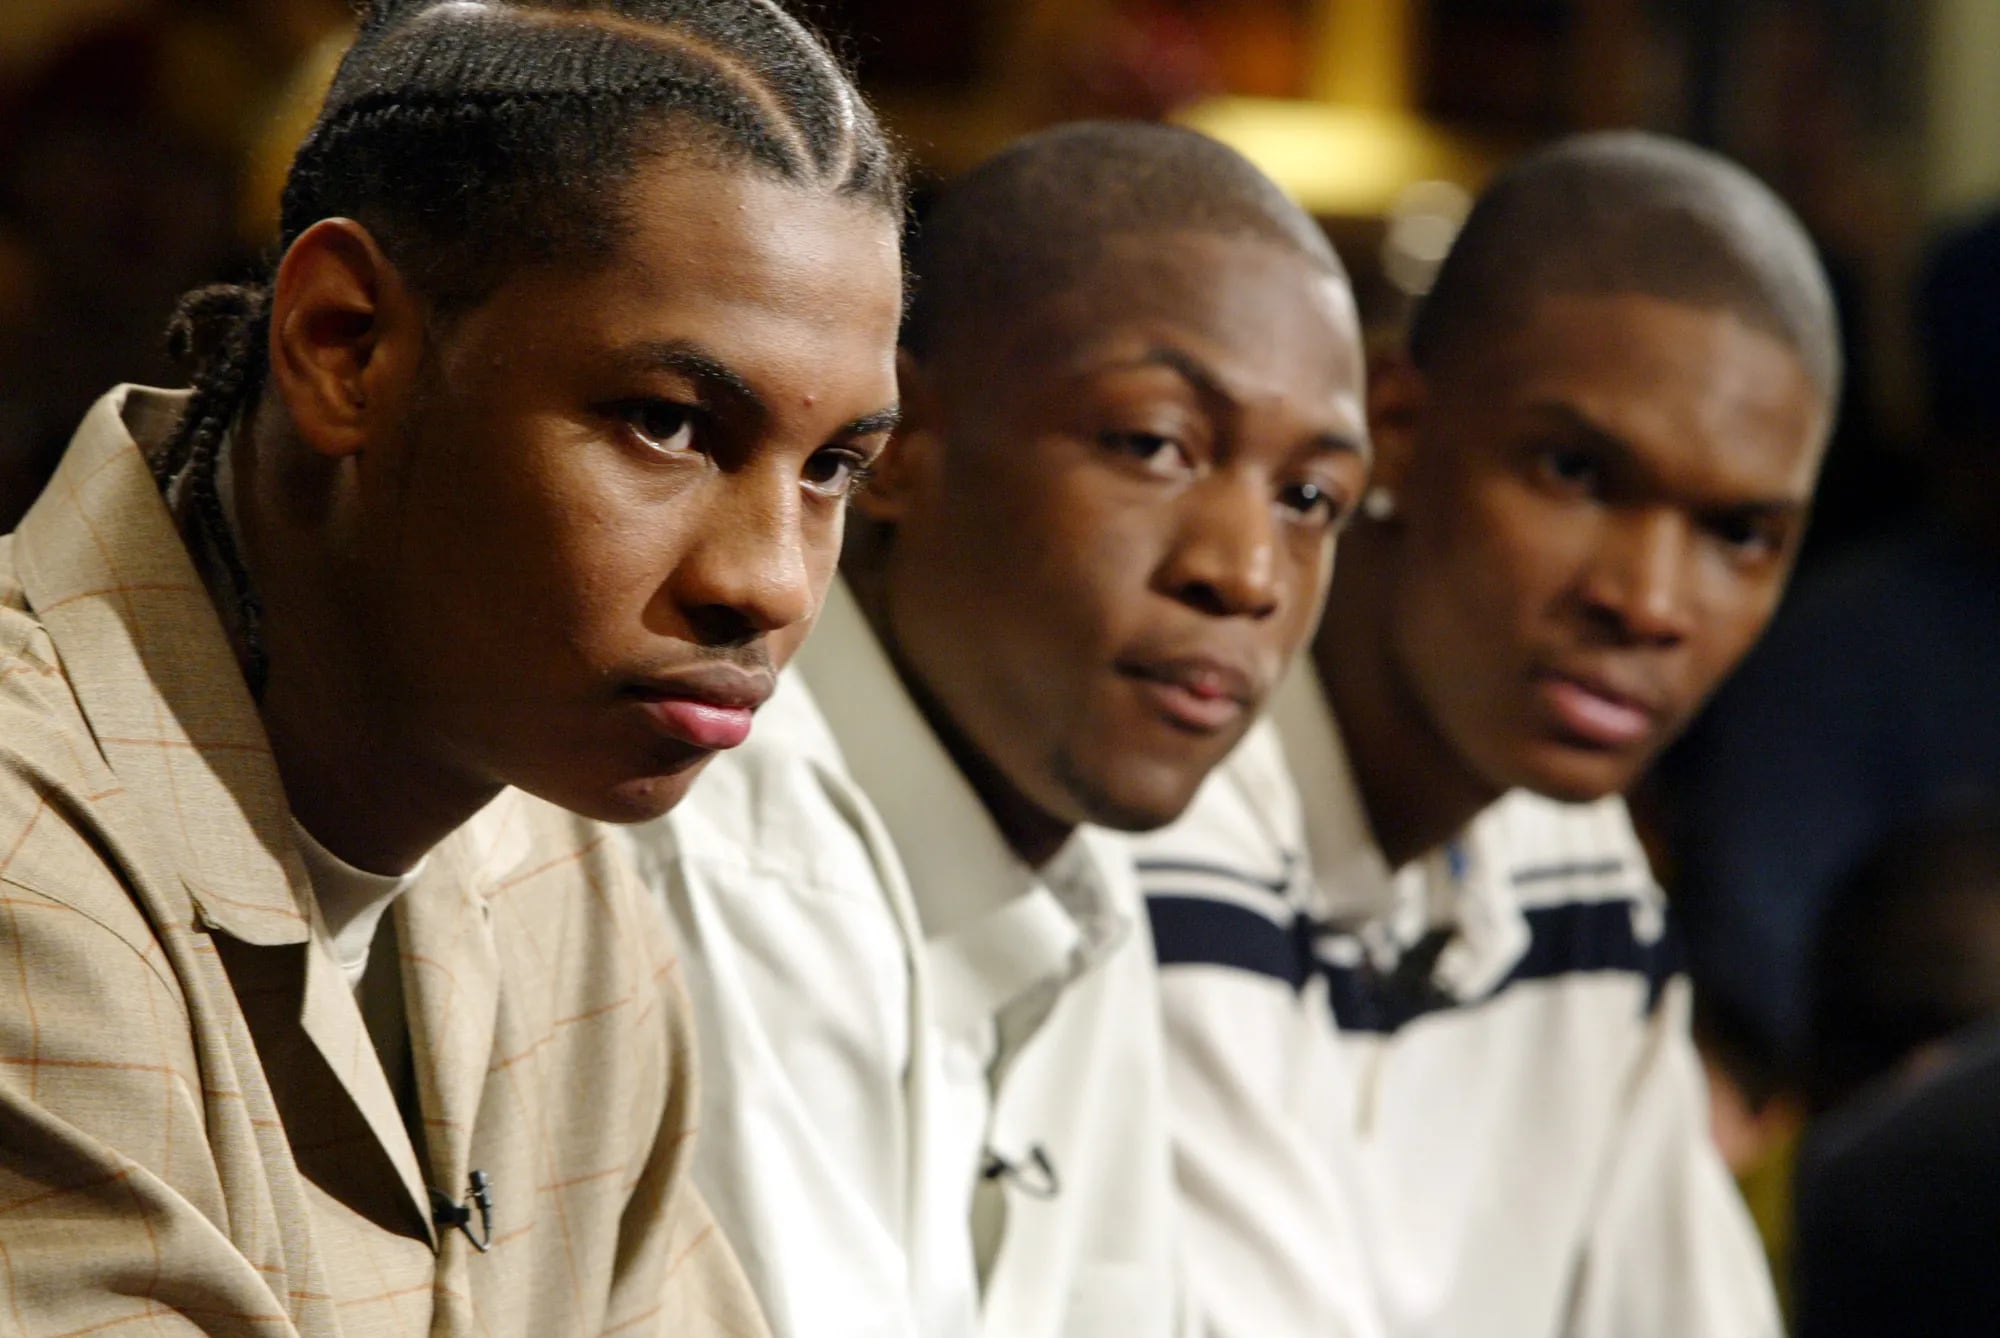 Top 10 Draft Picks From The 2003 NBA Draft: Where Are They Now